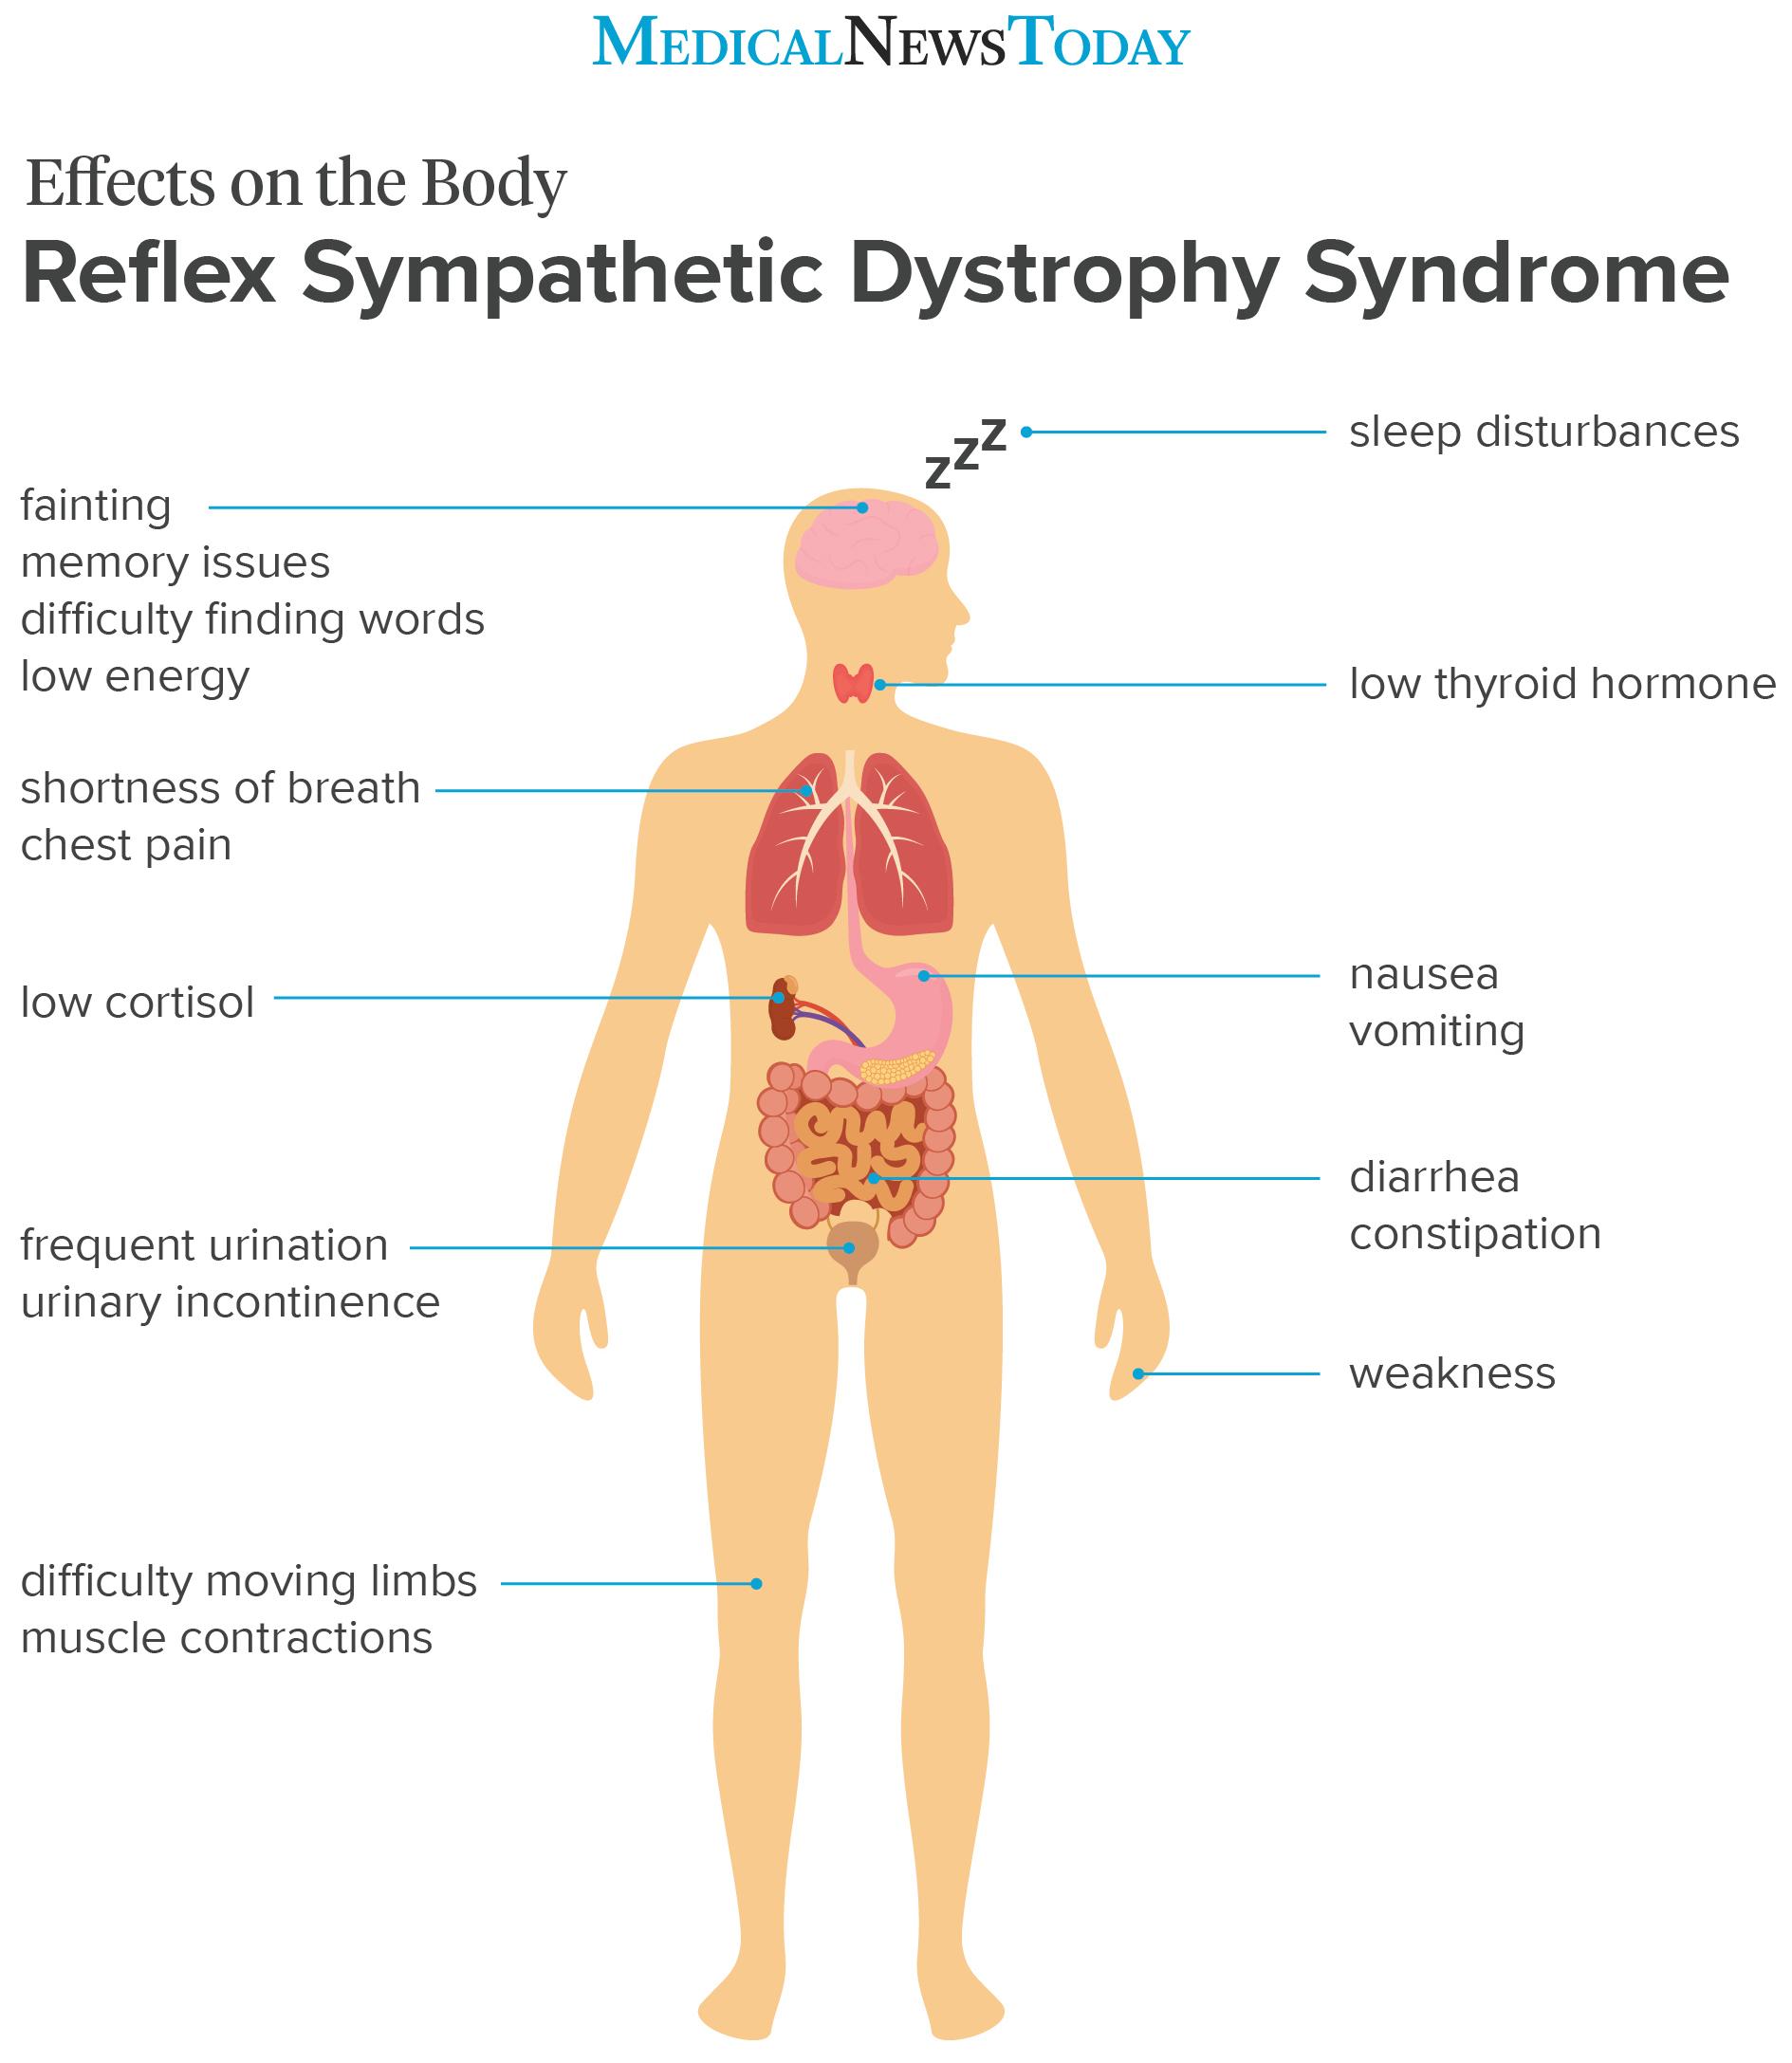 an infographic showing the effects on the body of RSD